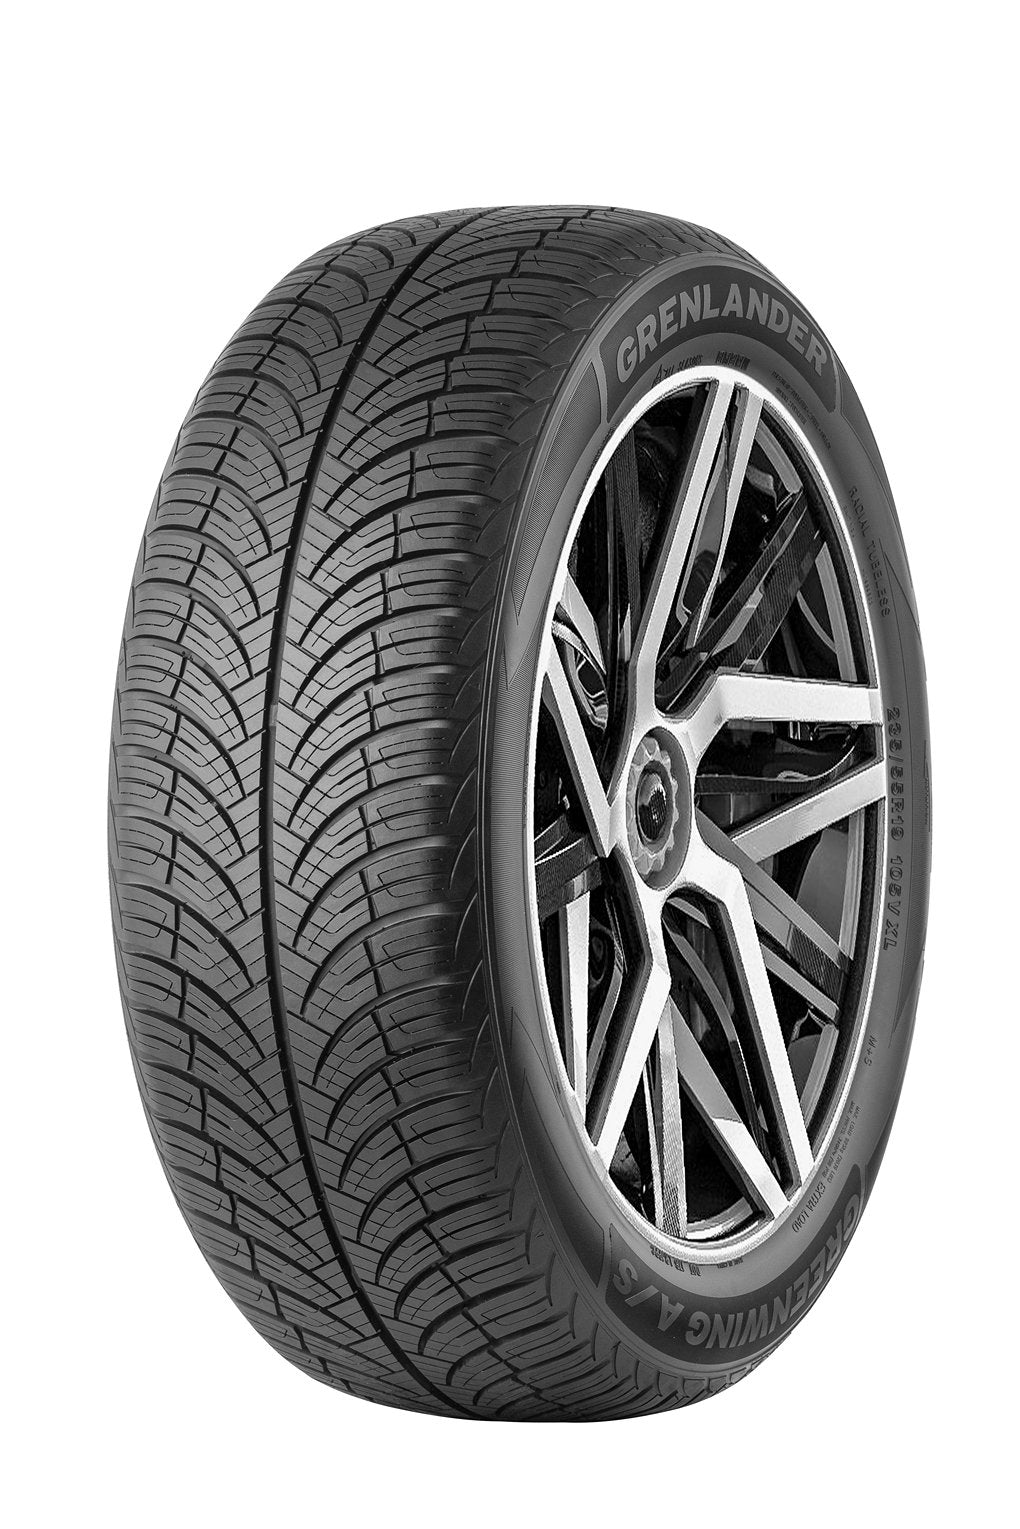 195/55R16 GRENLANDER GREENWING A/S ALL WEATHER - Toee Tire